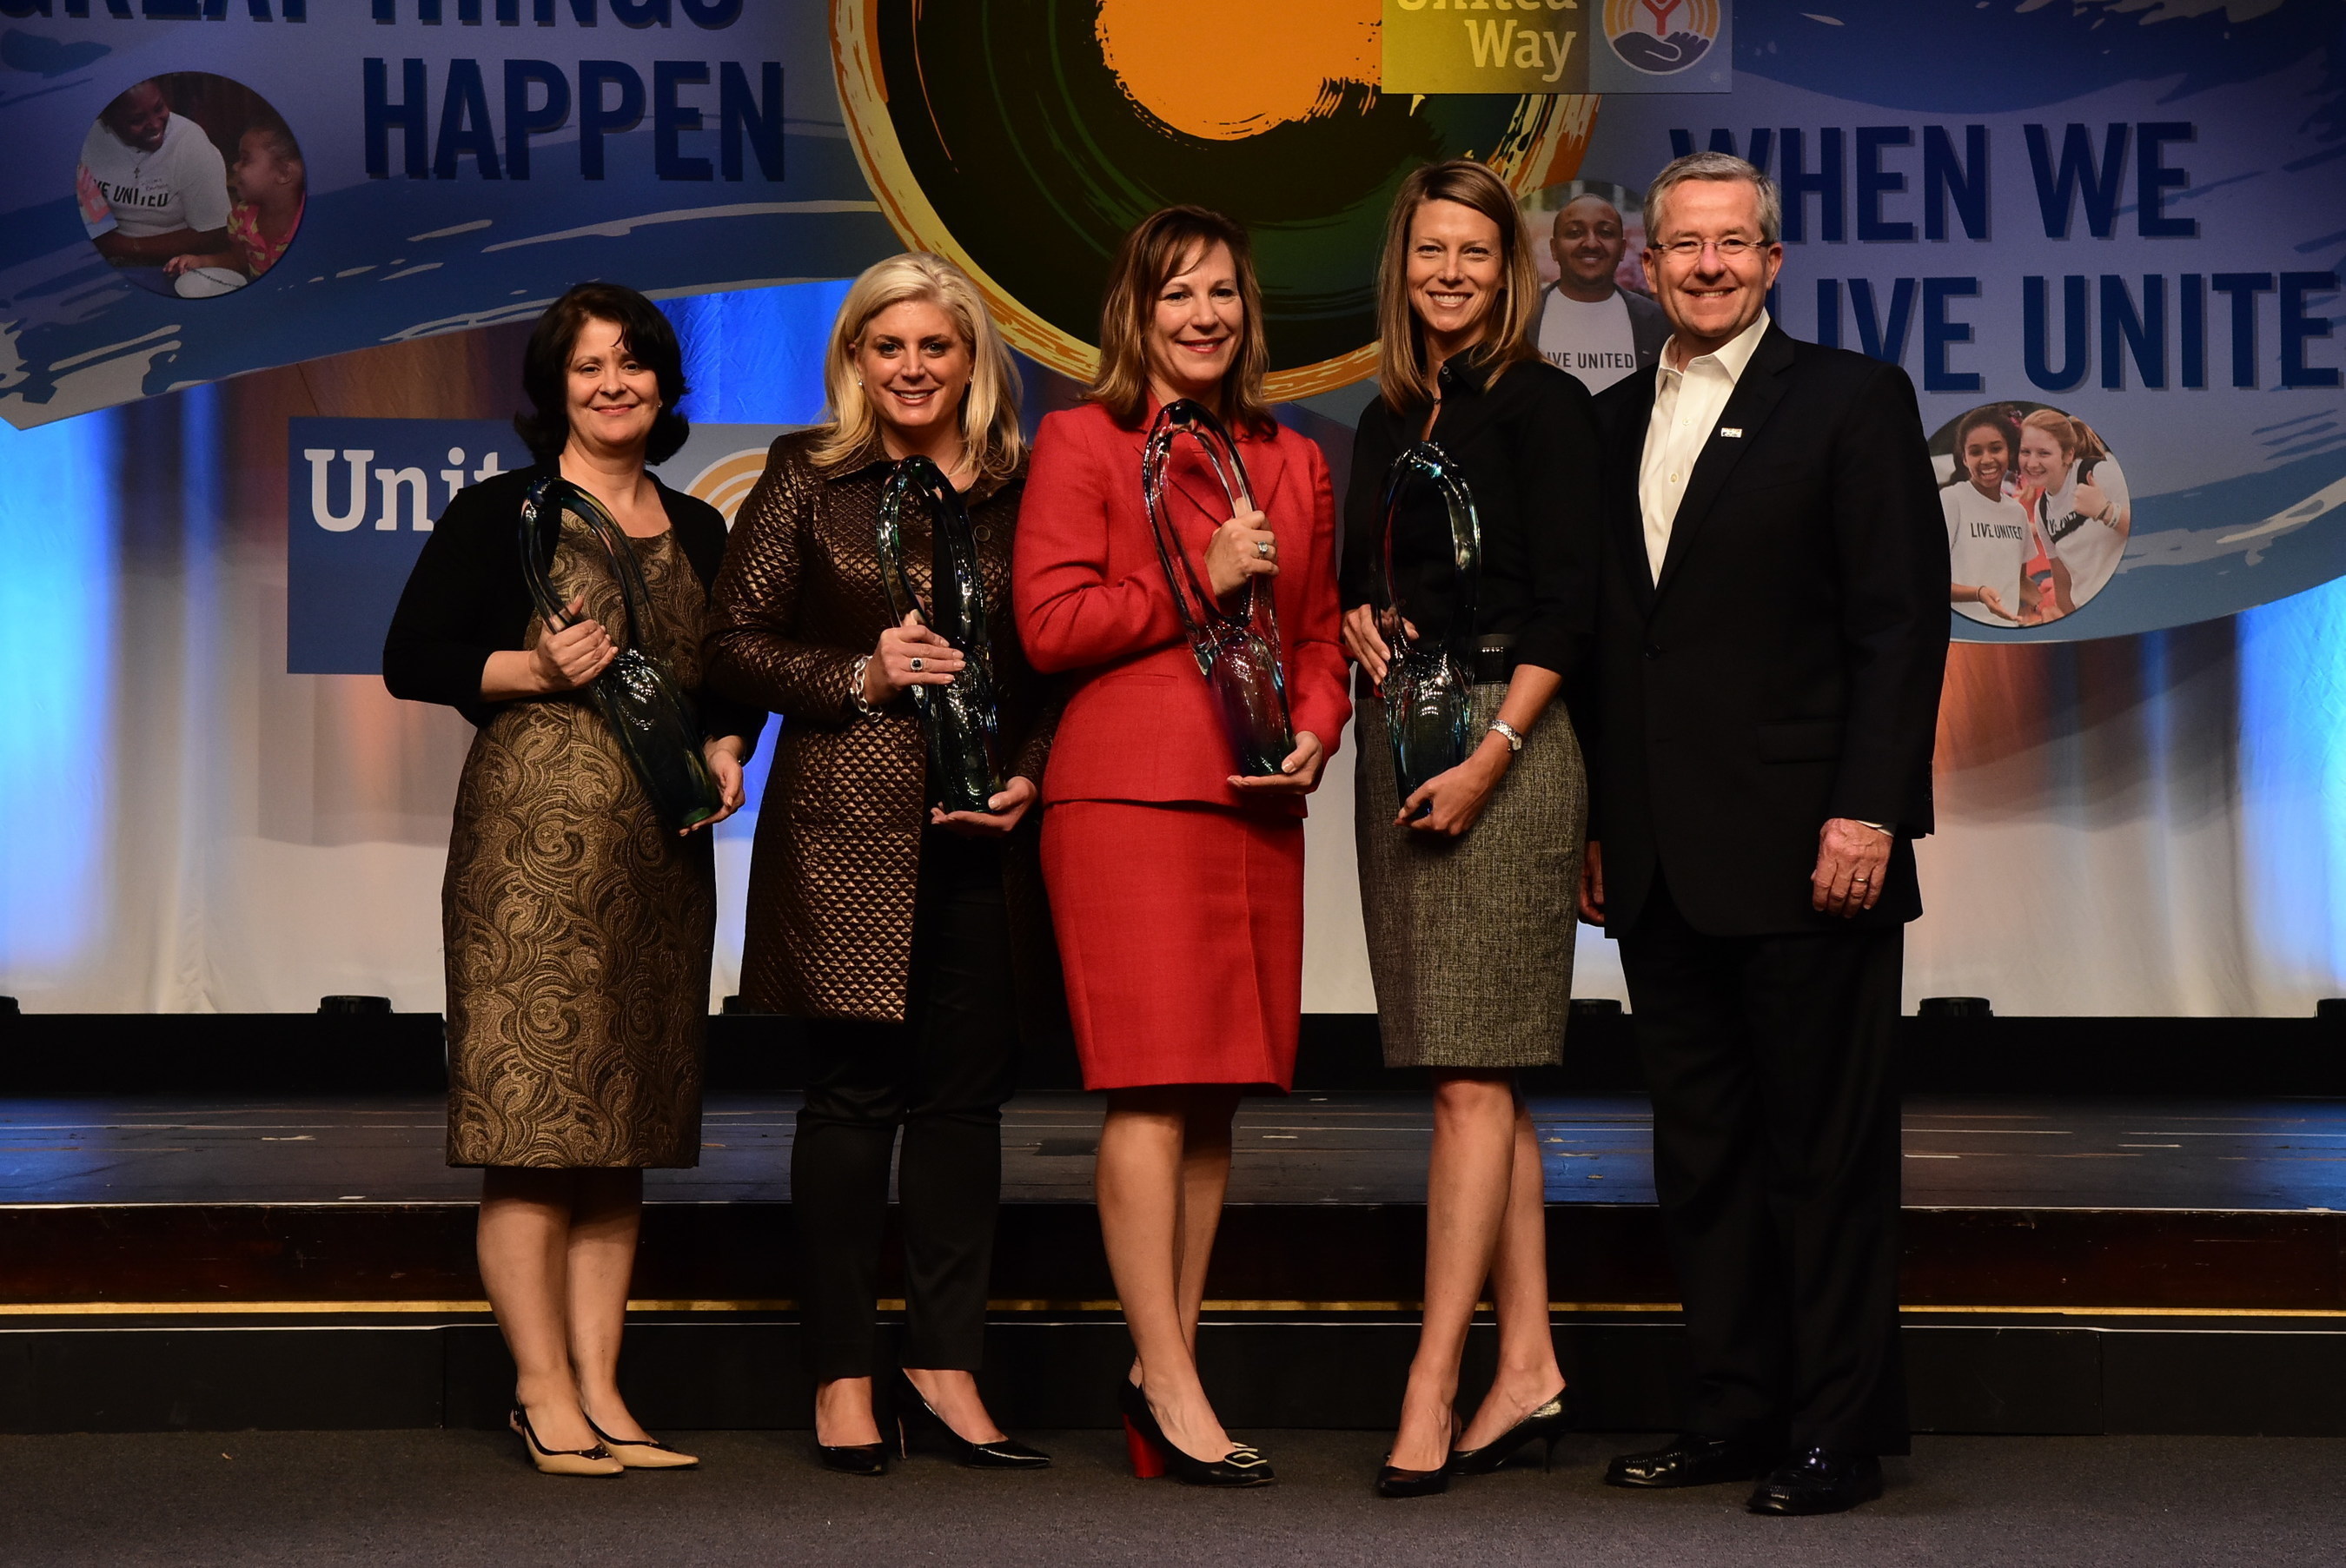 United Way Worldwide Honors Recognition Award recipients (from left): Laura Johns, Director Corporate Relations, The UPS Foundation; Mara Sovey, President, The John Deere Foundation; Laura MacNeil, Executive Vice President, Wells Fargo; Jenny Lewis, Vice President, Kimberly-Clark Foundation; and Brian Gallagher, President and Chief Executive Officer, United Way Worldwide